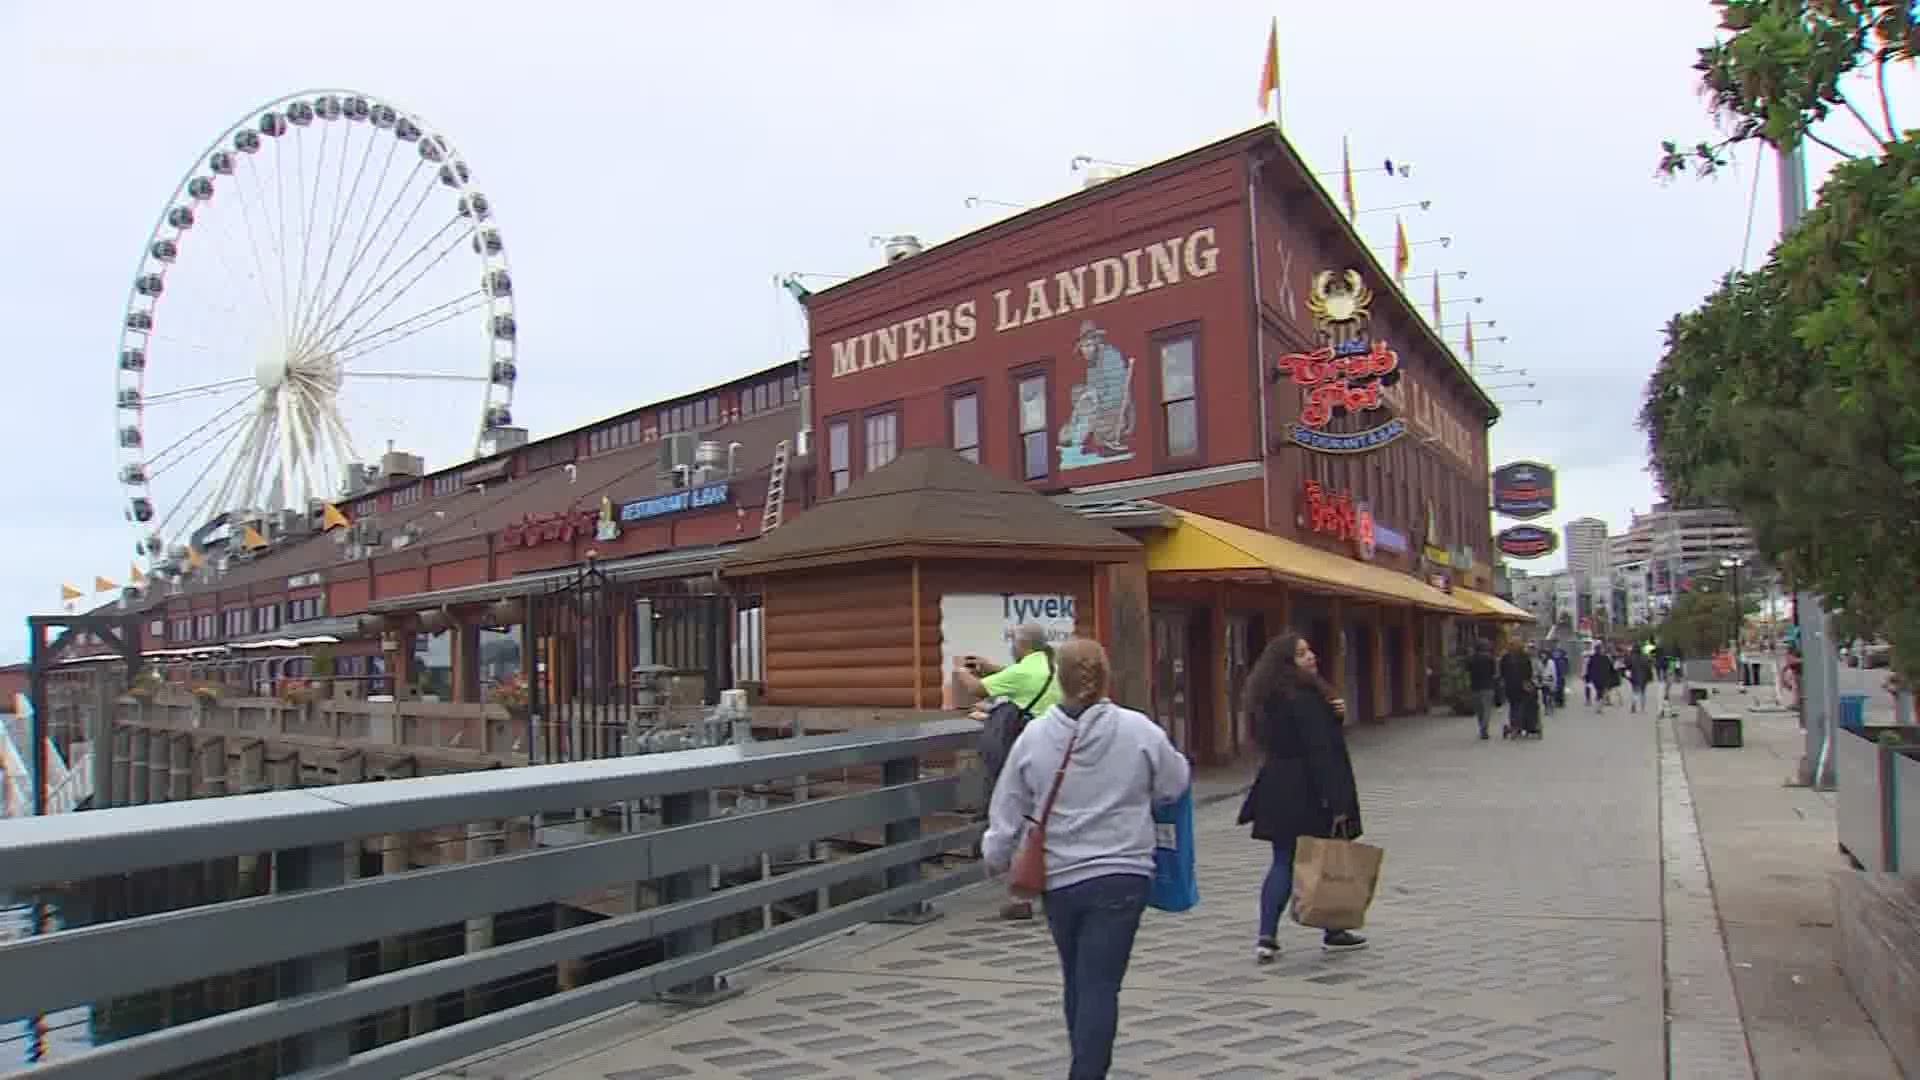 Businesses on Seattle's normally busy Pier 57, also known as Miner's Landing, are now scrambling after being forced to close due to safety concerns about the pier.